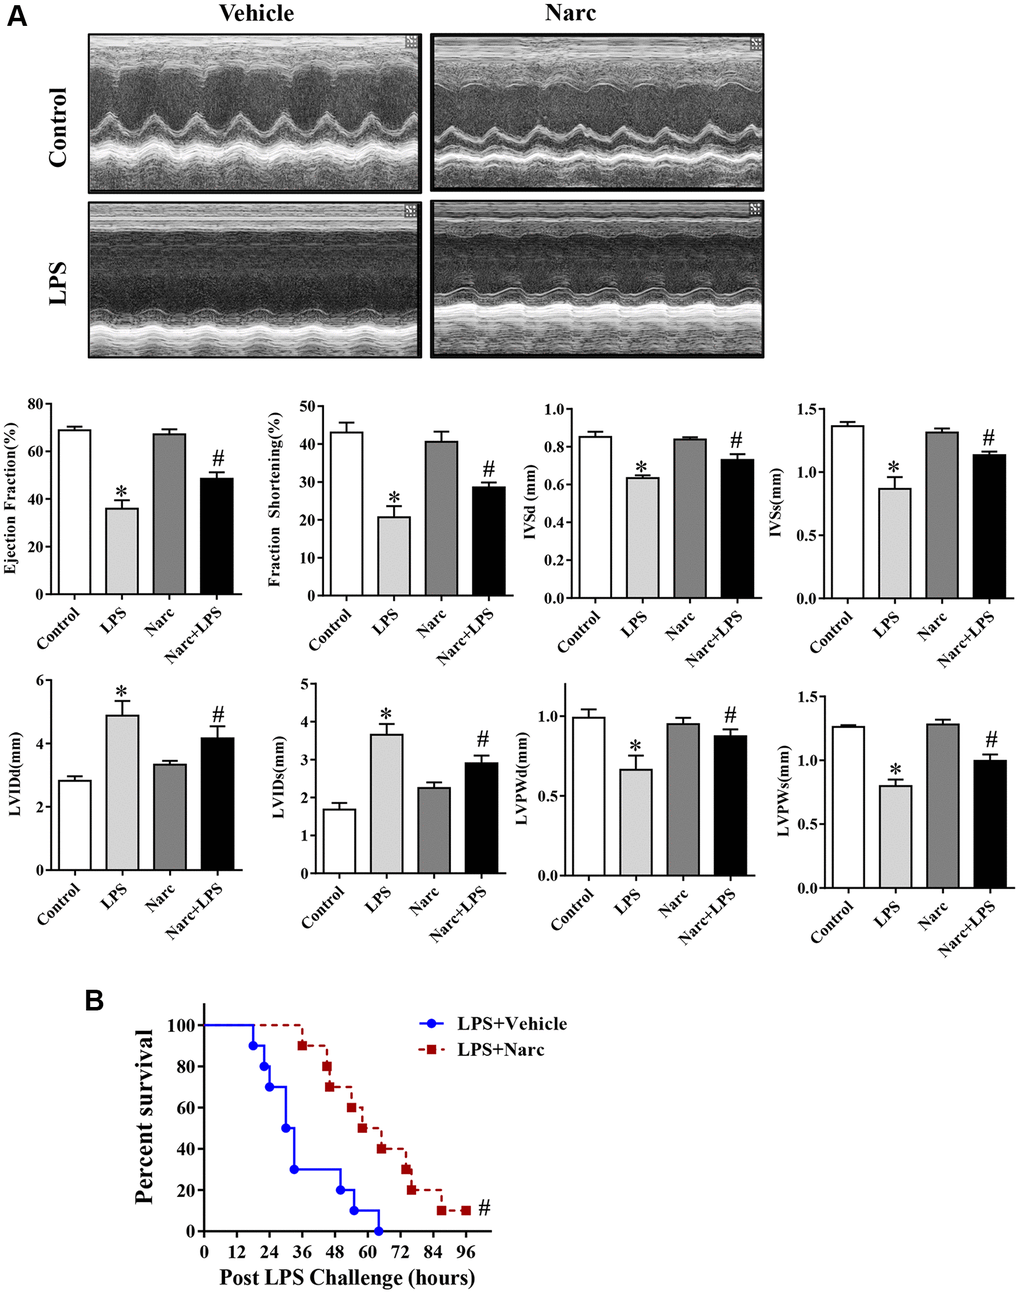 Narciclasine attenuates LPS-induced myocardial dysfunction. (A) Echocardiographic analysis of LVEF, LVFS, IVSd, IVSs, LVIDs, LVIDd, LVPWd, and LVPWs after LPS challenge for 12 h. (B) The survival rates of LPS-injected mice throughout the 96-h study period. LVEF, left ventricular ejection fraction; LVFS, left ventricular fractional shortening; IVSd and IVSs, interventricular septal end diastole and end systole, respectively; LVIDd and LVIDs, left ventricular internal diameter end diastole and end systole, respectively; LVPWd and LVPWs, left ventricular posterior wall end diastole and end systole, respectively. n = 8 per group. The data are shown as the means ± SEM. *P #P 